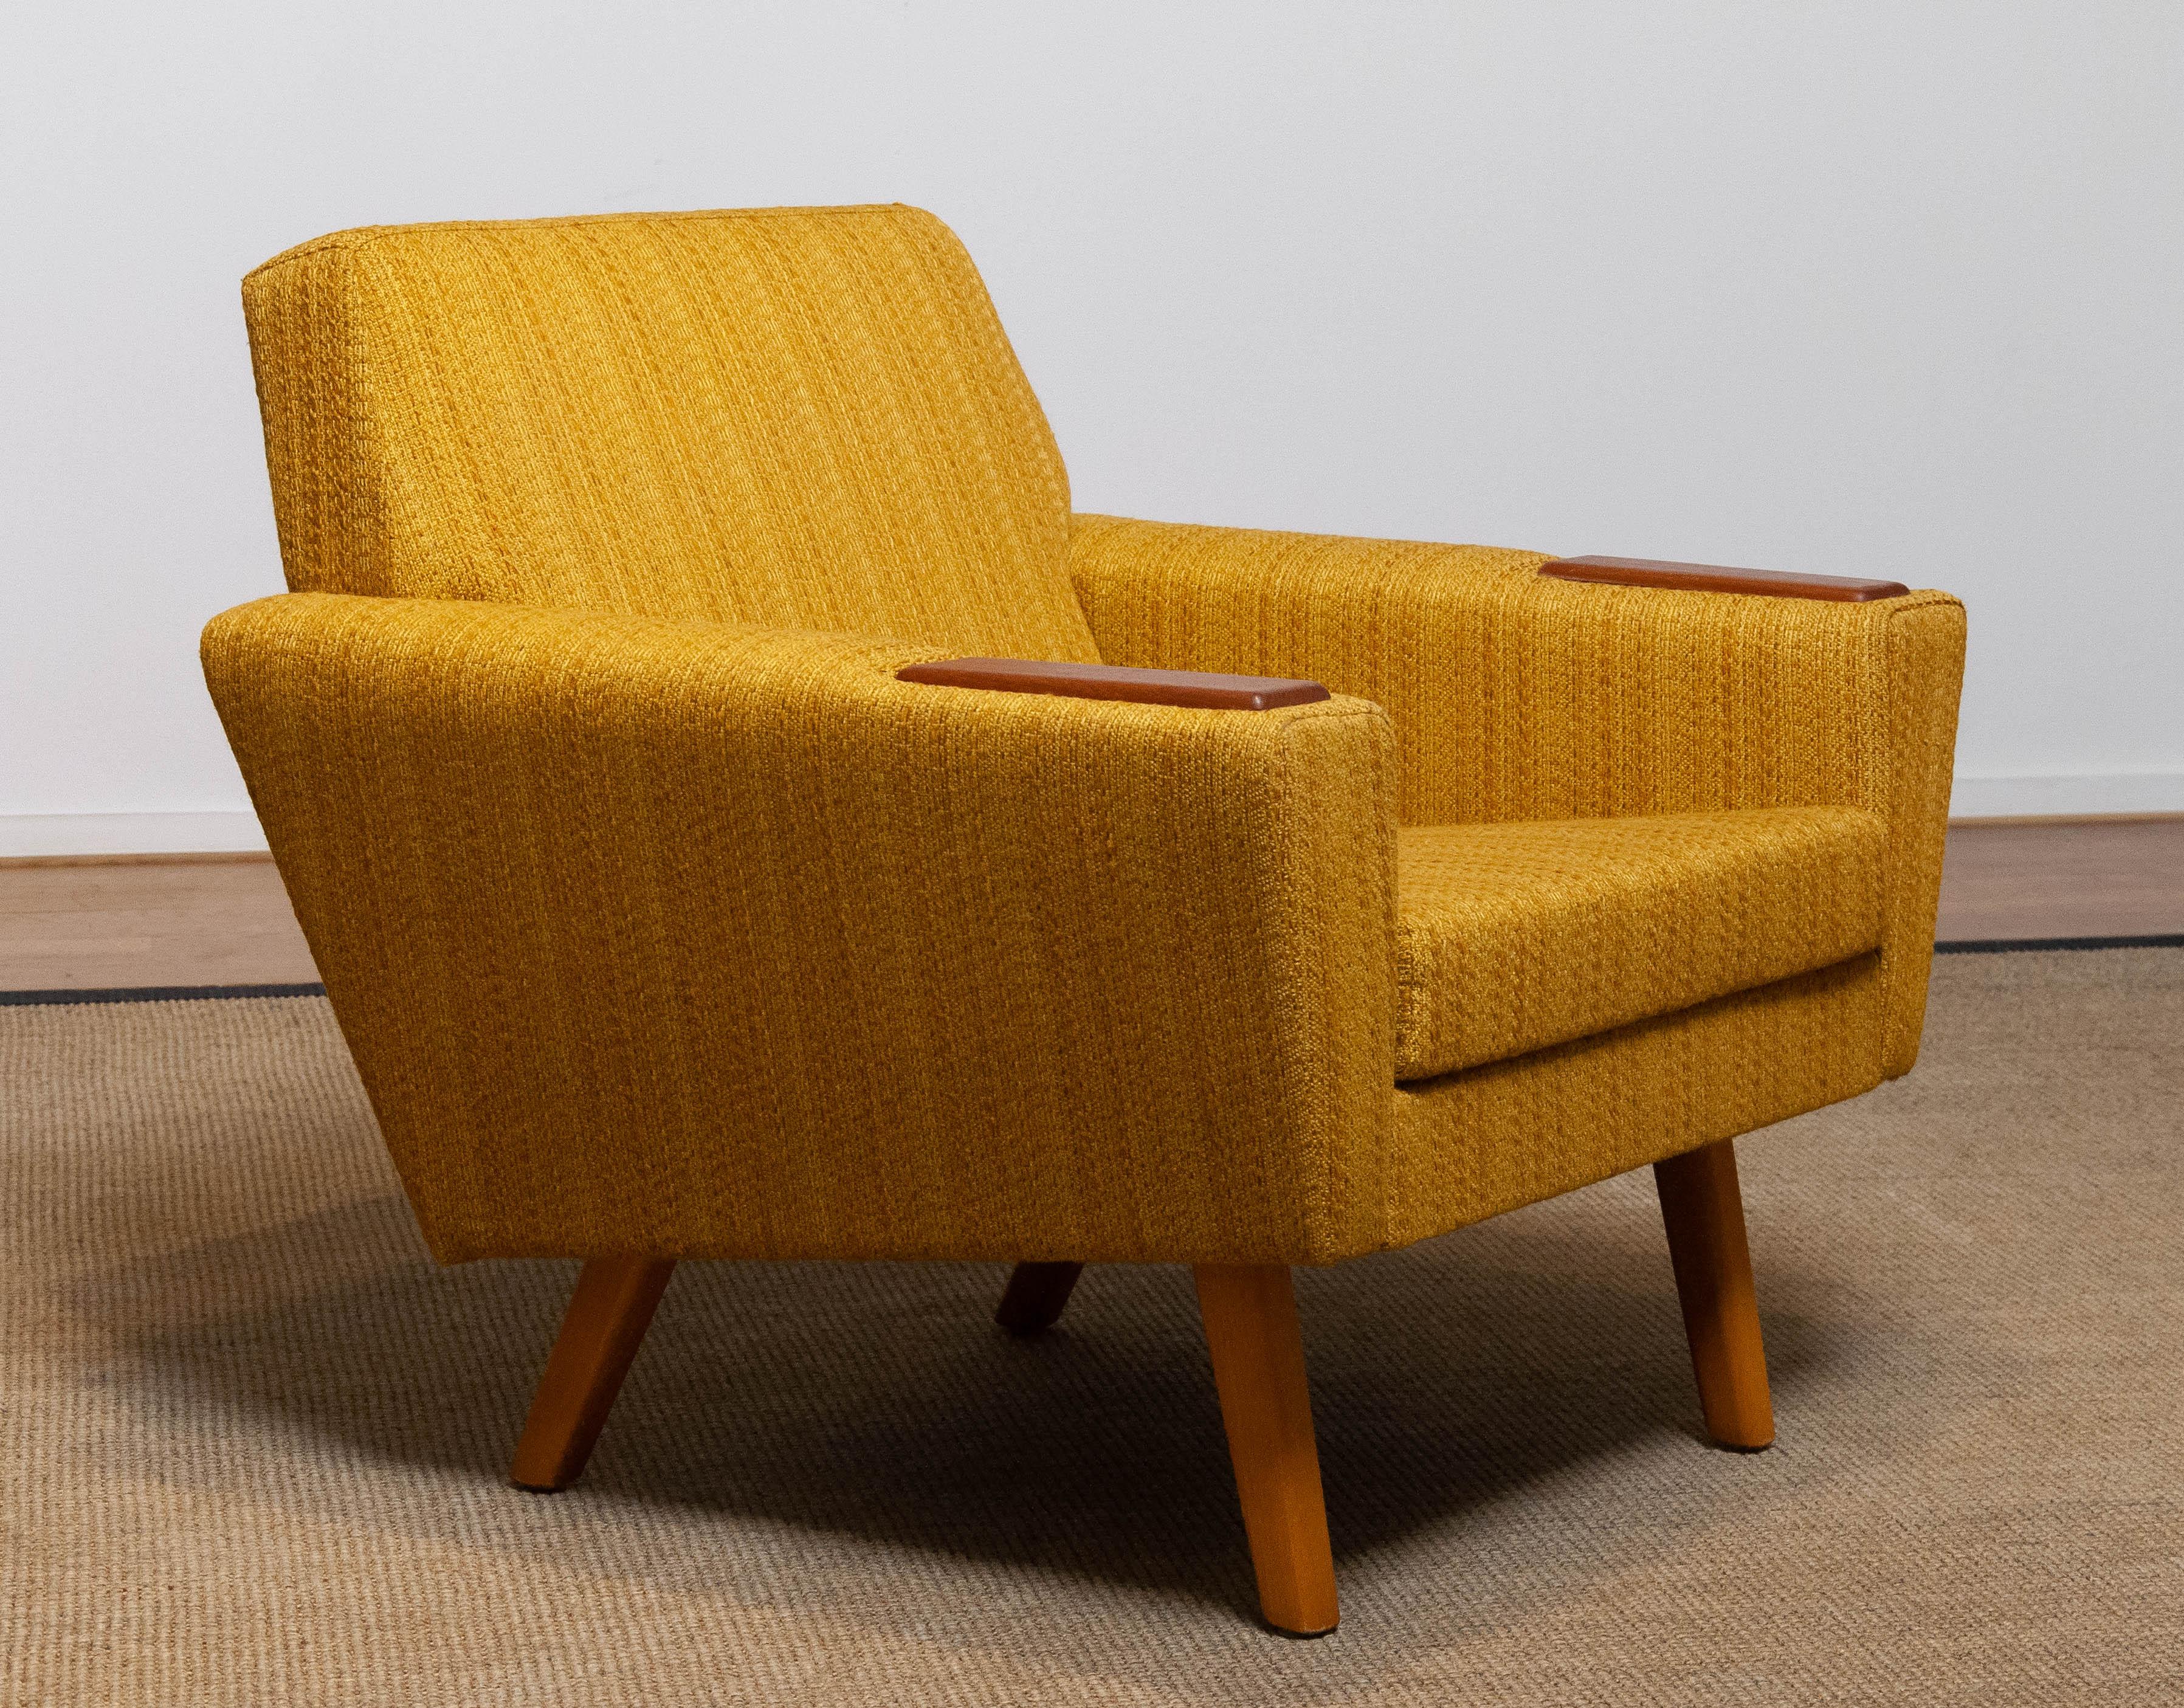 Absolutely beautiful and typical Scandinavian mid century lounge chair in yellow / ocher and a little brown blended colored woolen fabric in complete original condition. This chair supports and sits very good and is in allover very good condition as